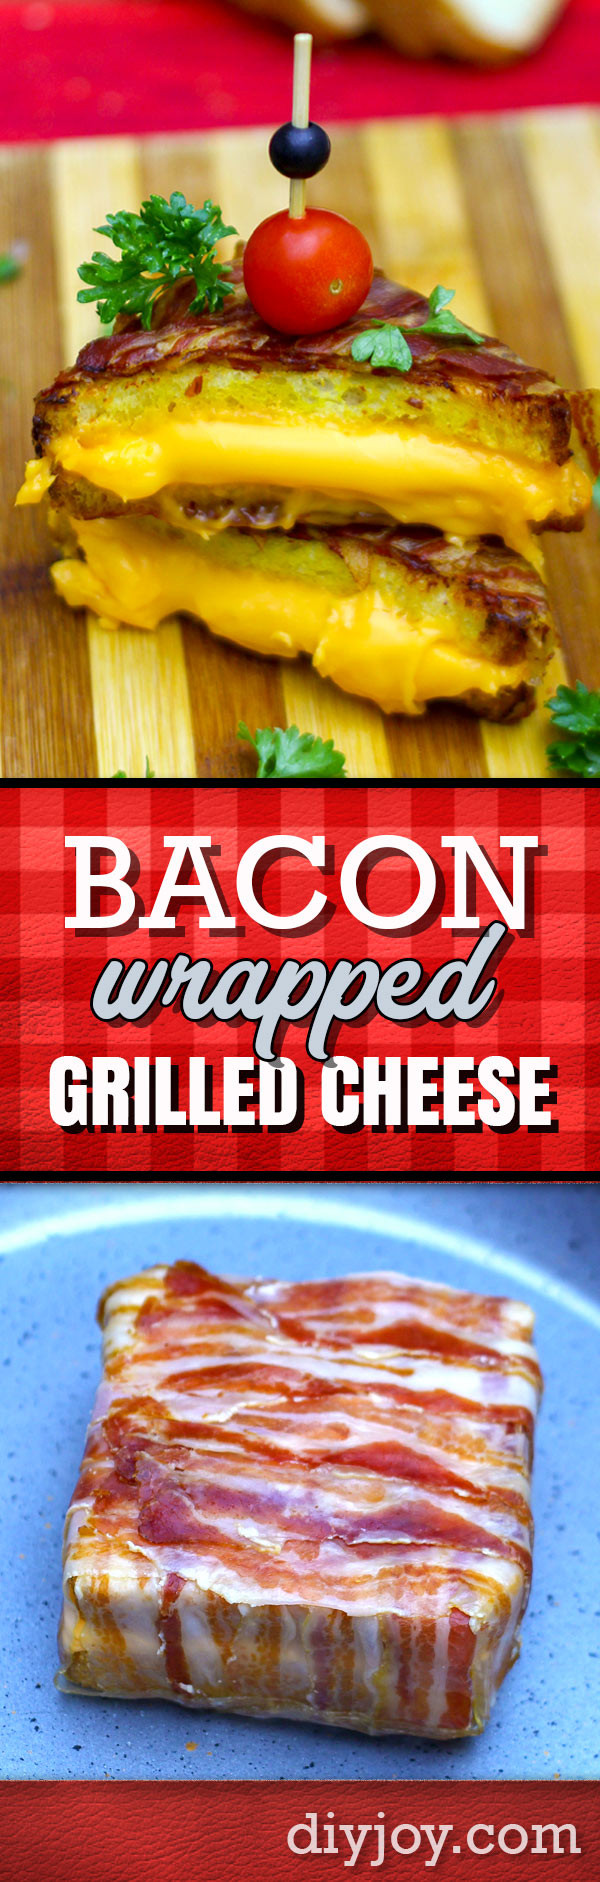 Bacon Wrapped Grilled Cheese Sandwiches
 This Bacon Wrapped Grilled Cheese Just Won Sandwiches Forever